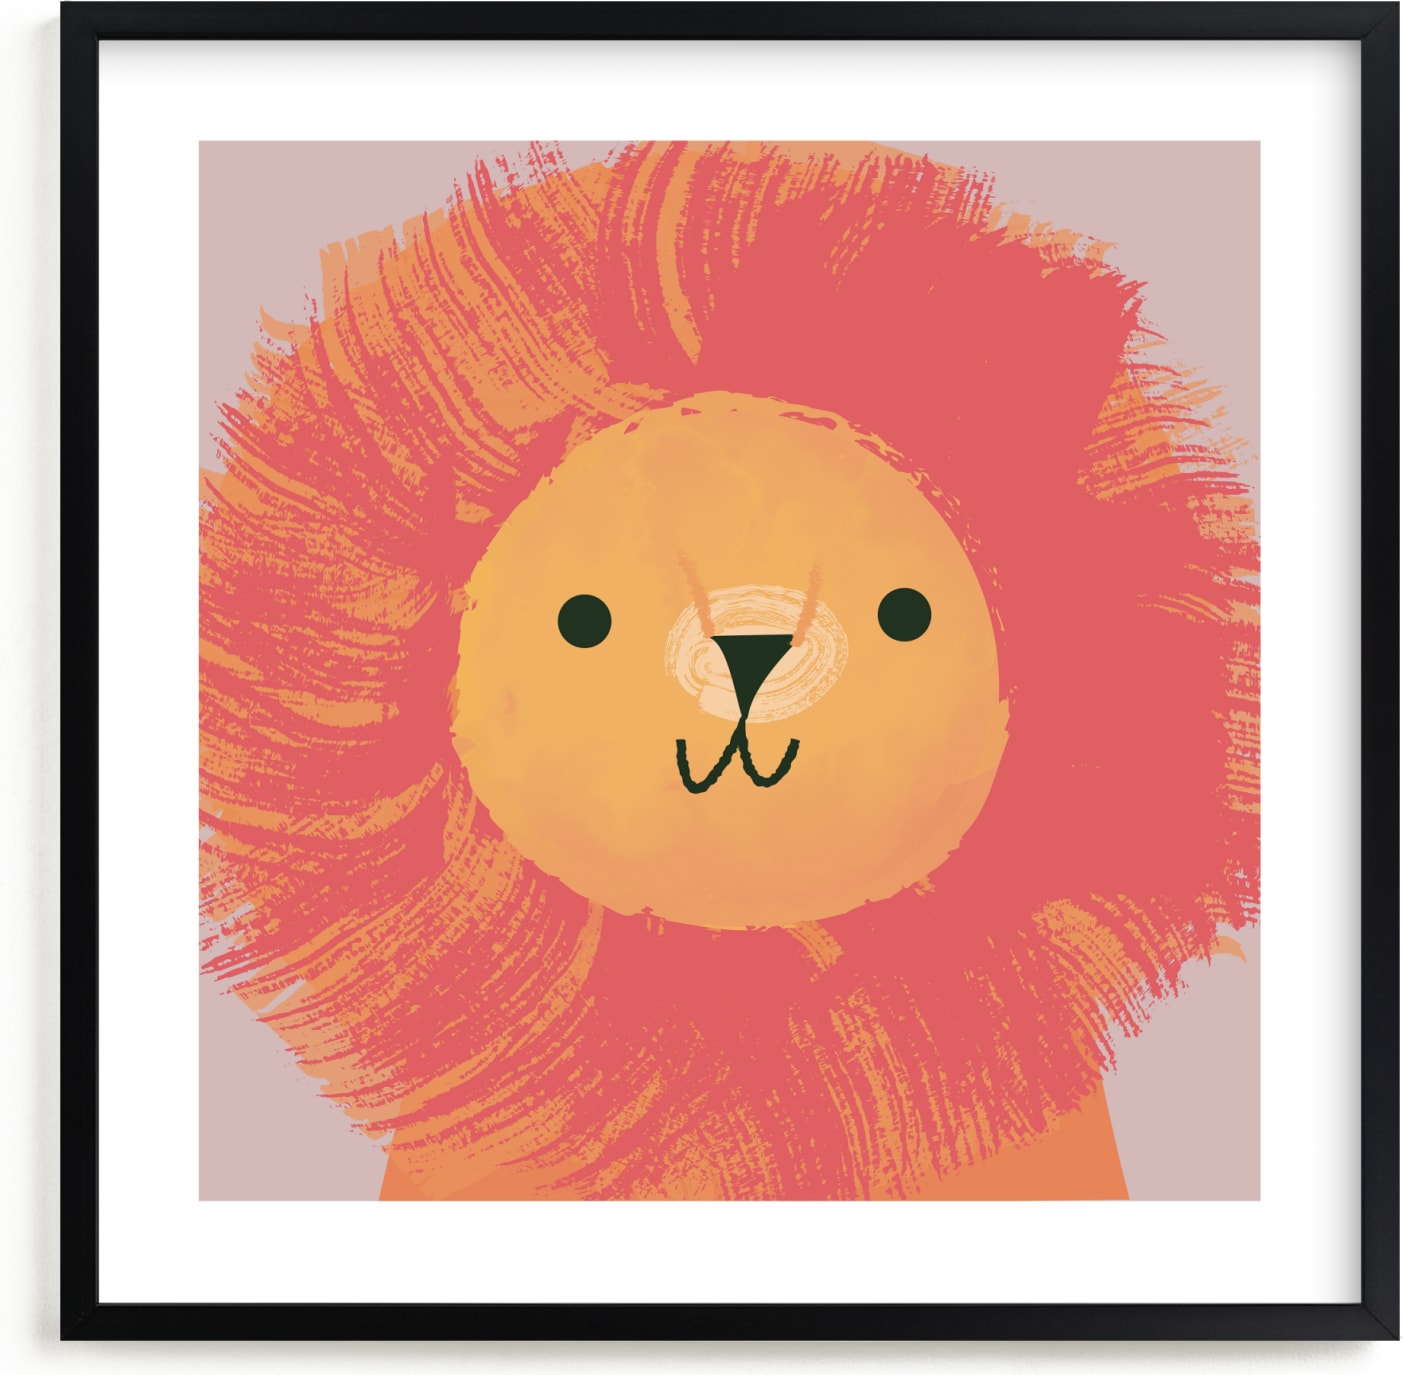 This is a pink nursery wall art by Lori Wemple called King Of The Jungle.